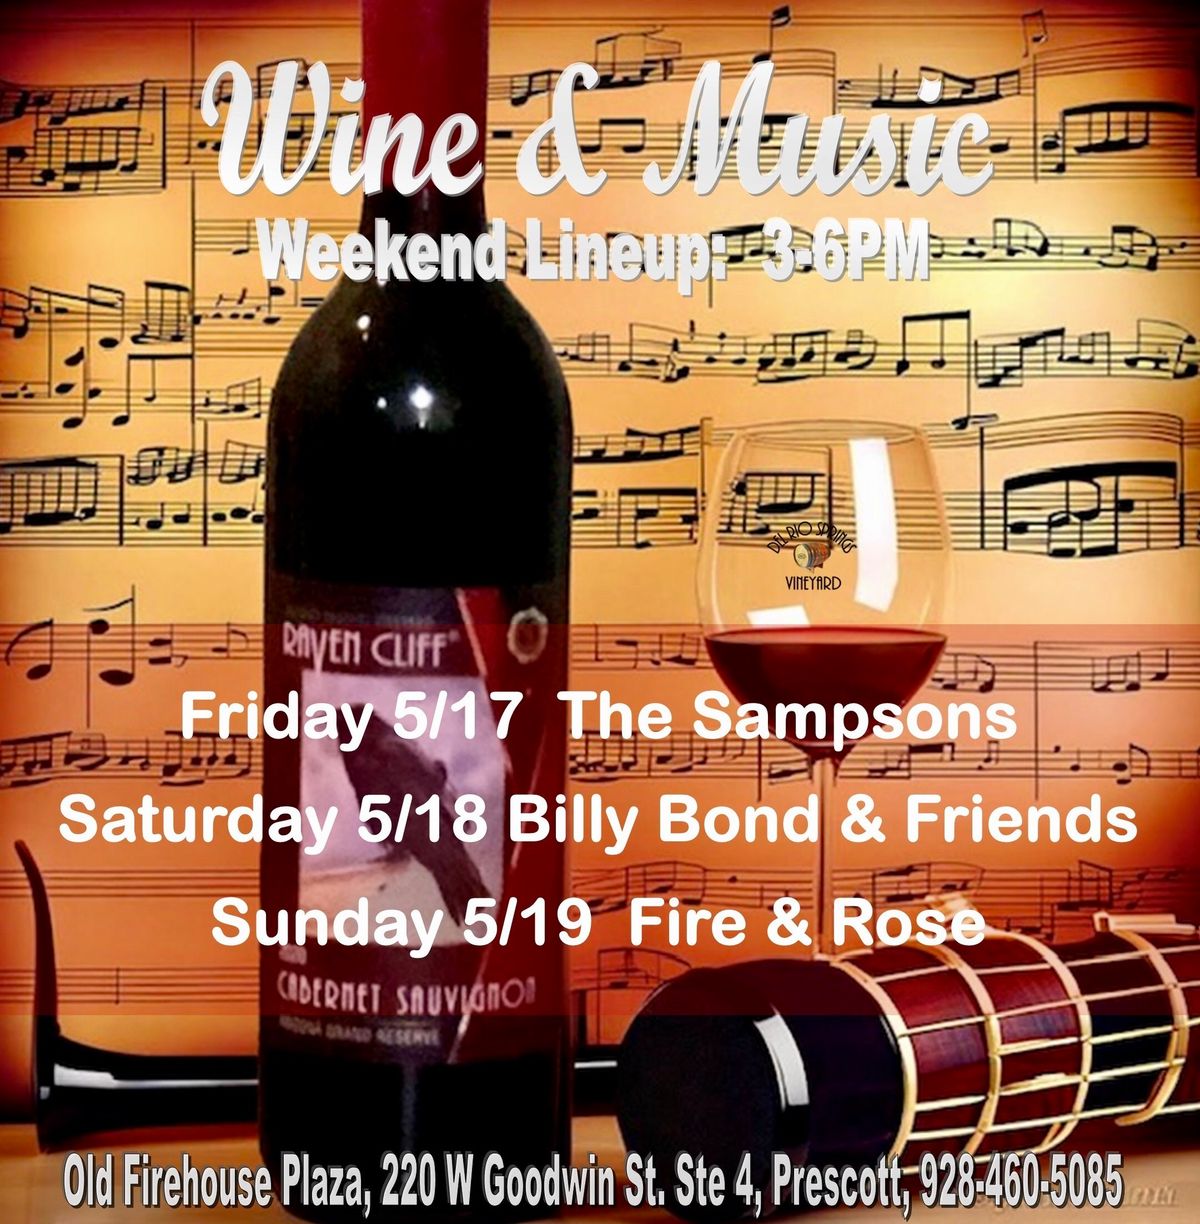 Weekend Wine and Live Music